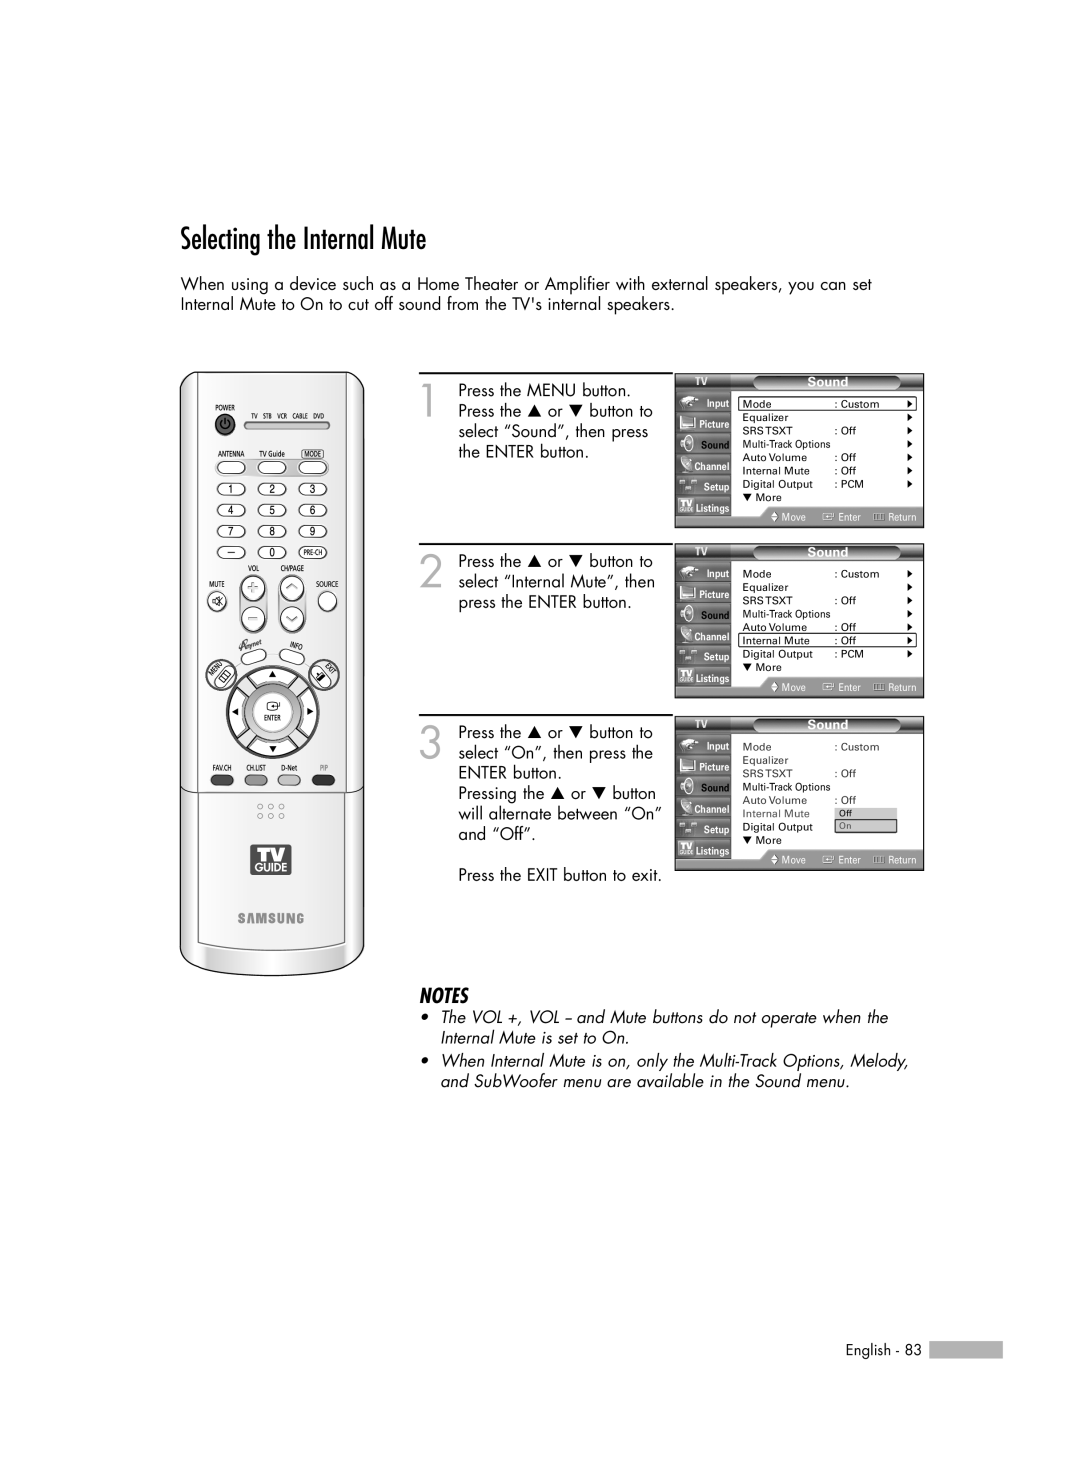 Samsung HL-R5688W manual Selecting the Internal Mute, Sound 